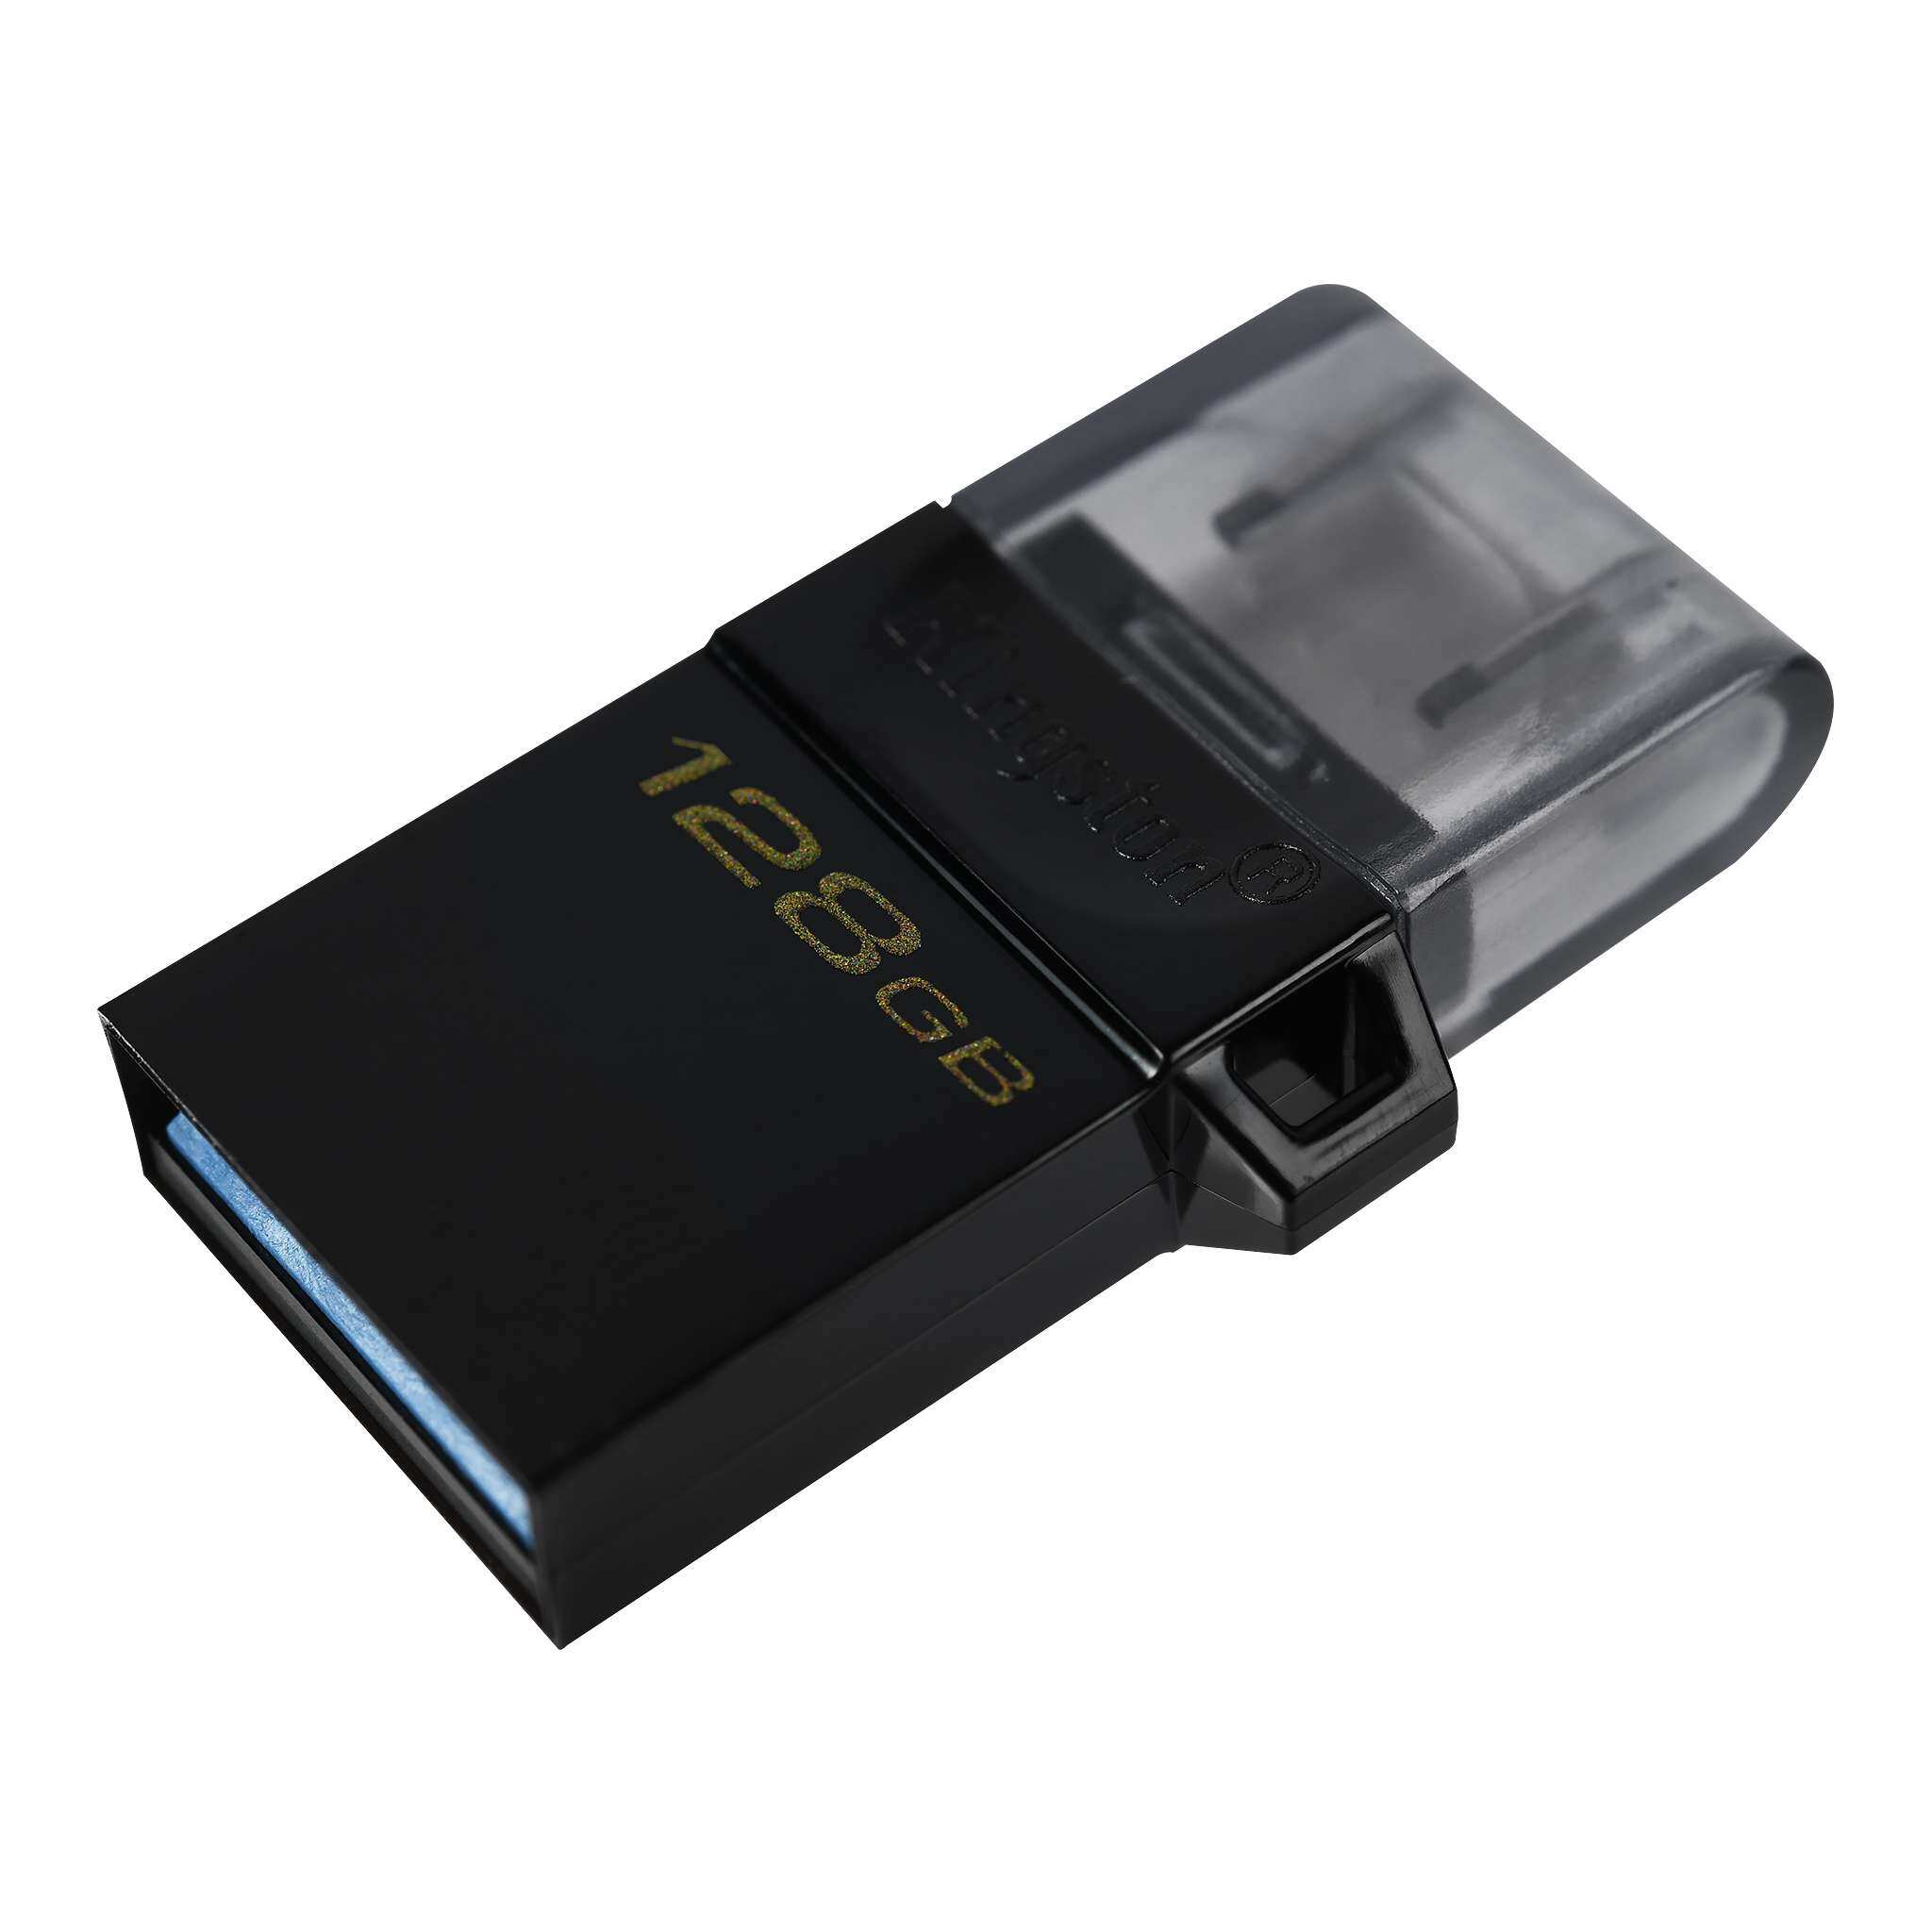 Kingston OTG DataTraveler microDuo 3.0 G2 with Dual Interface USB Type-A and Micro USB, Cap Protect, Strap Hole, Plug and Play (32GB / 64GB / 128GB)